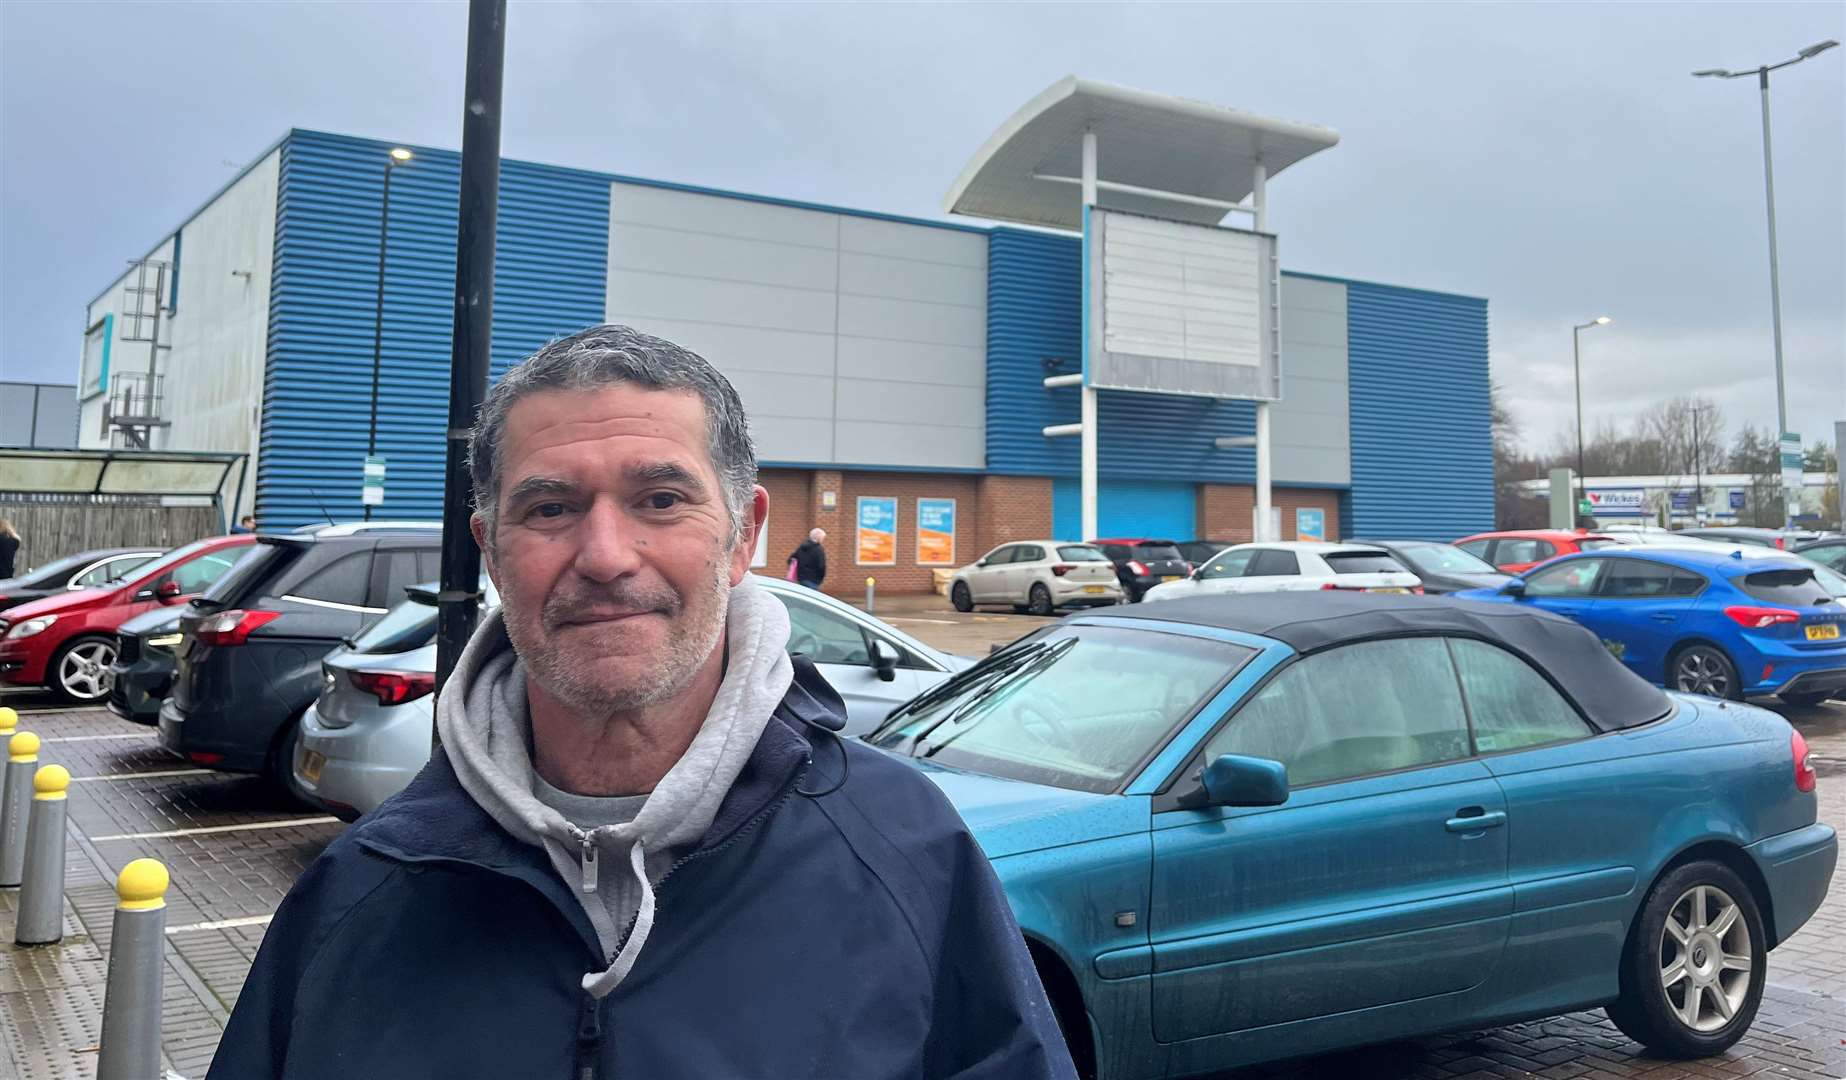 Valentine Doldan was one of many shoppers to welcome the plans when they were announced last month